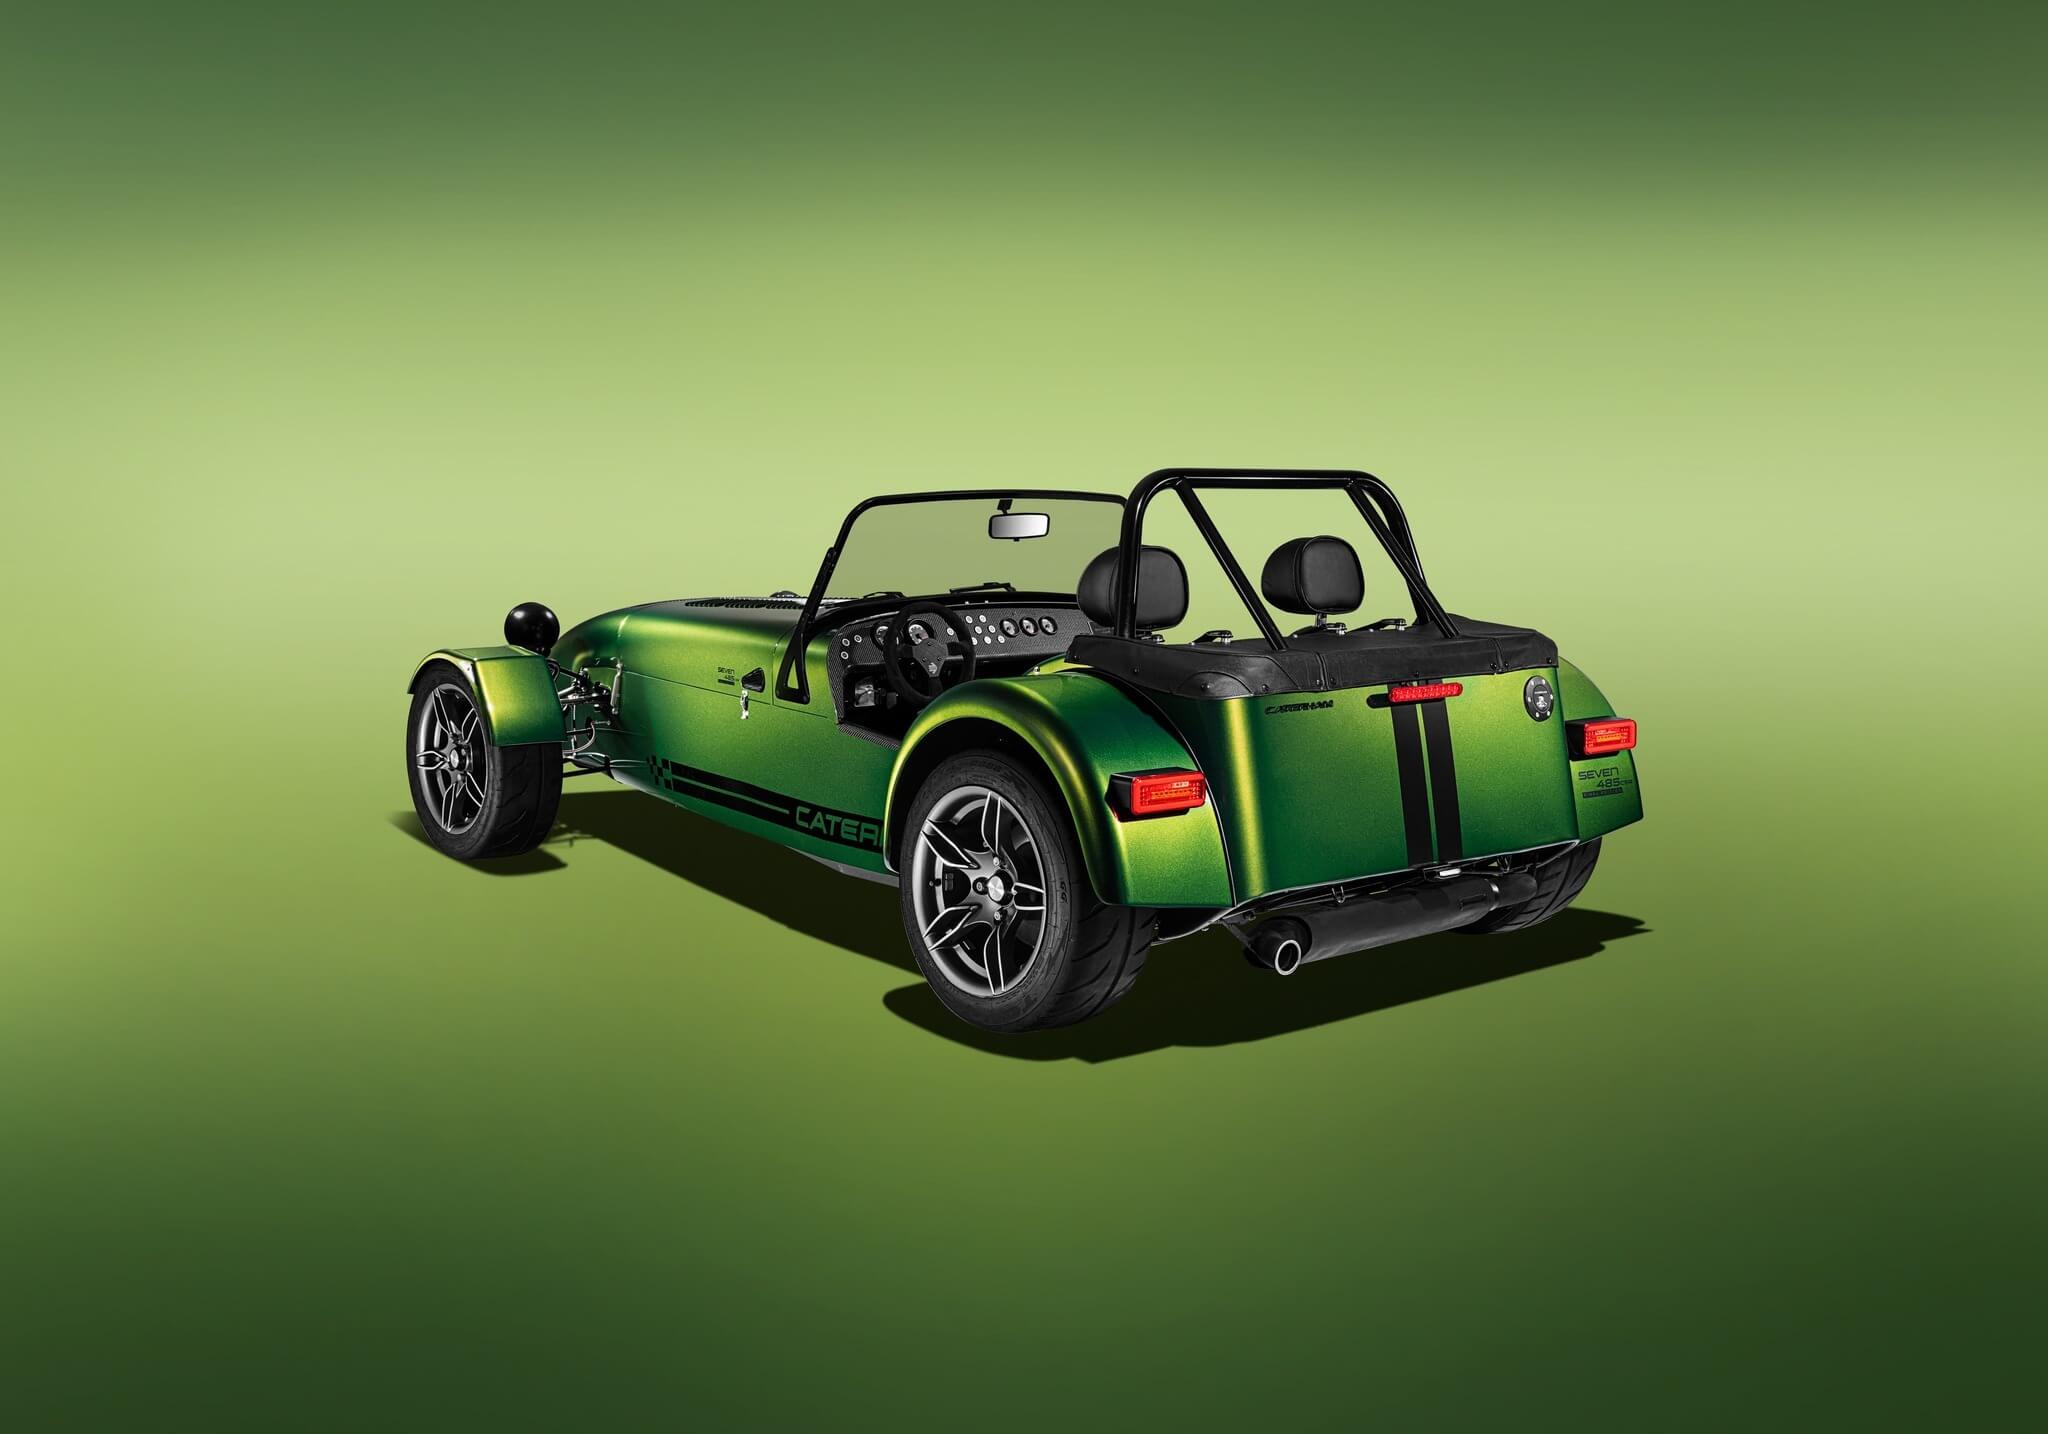 Caterham has released a farewell version of its most powerful sports car.